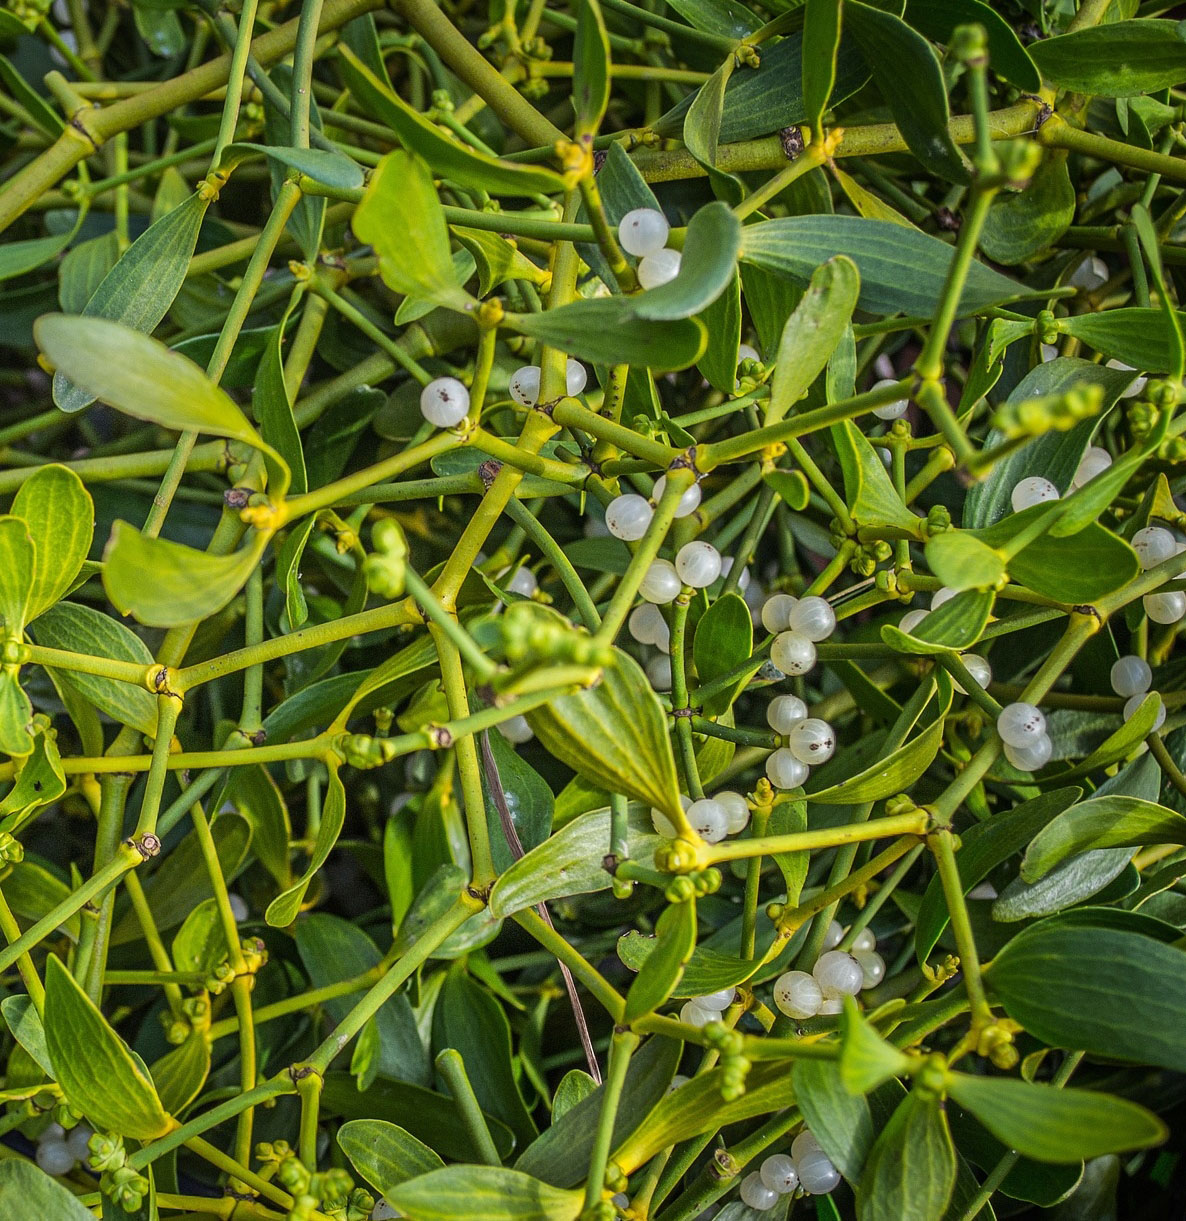 A cloae up image of mistletoe with white berries.